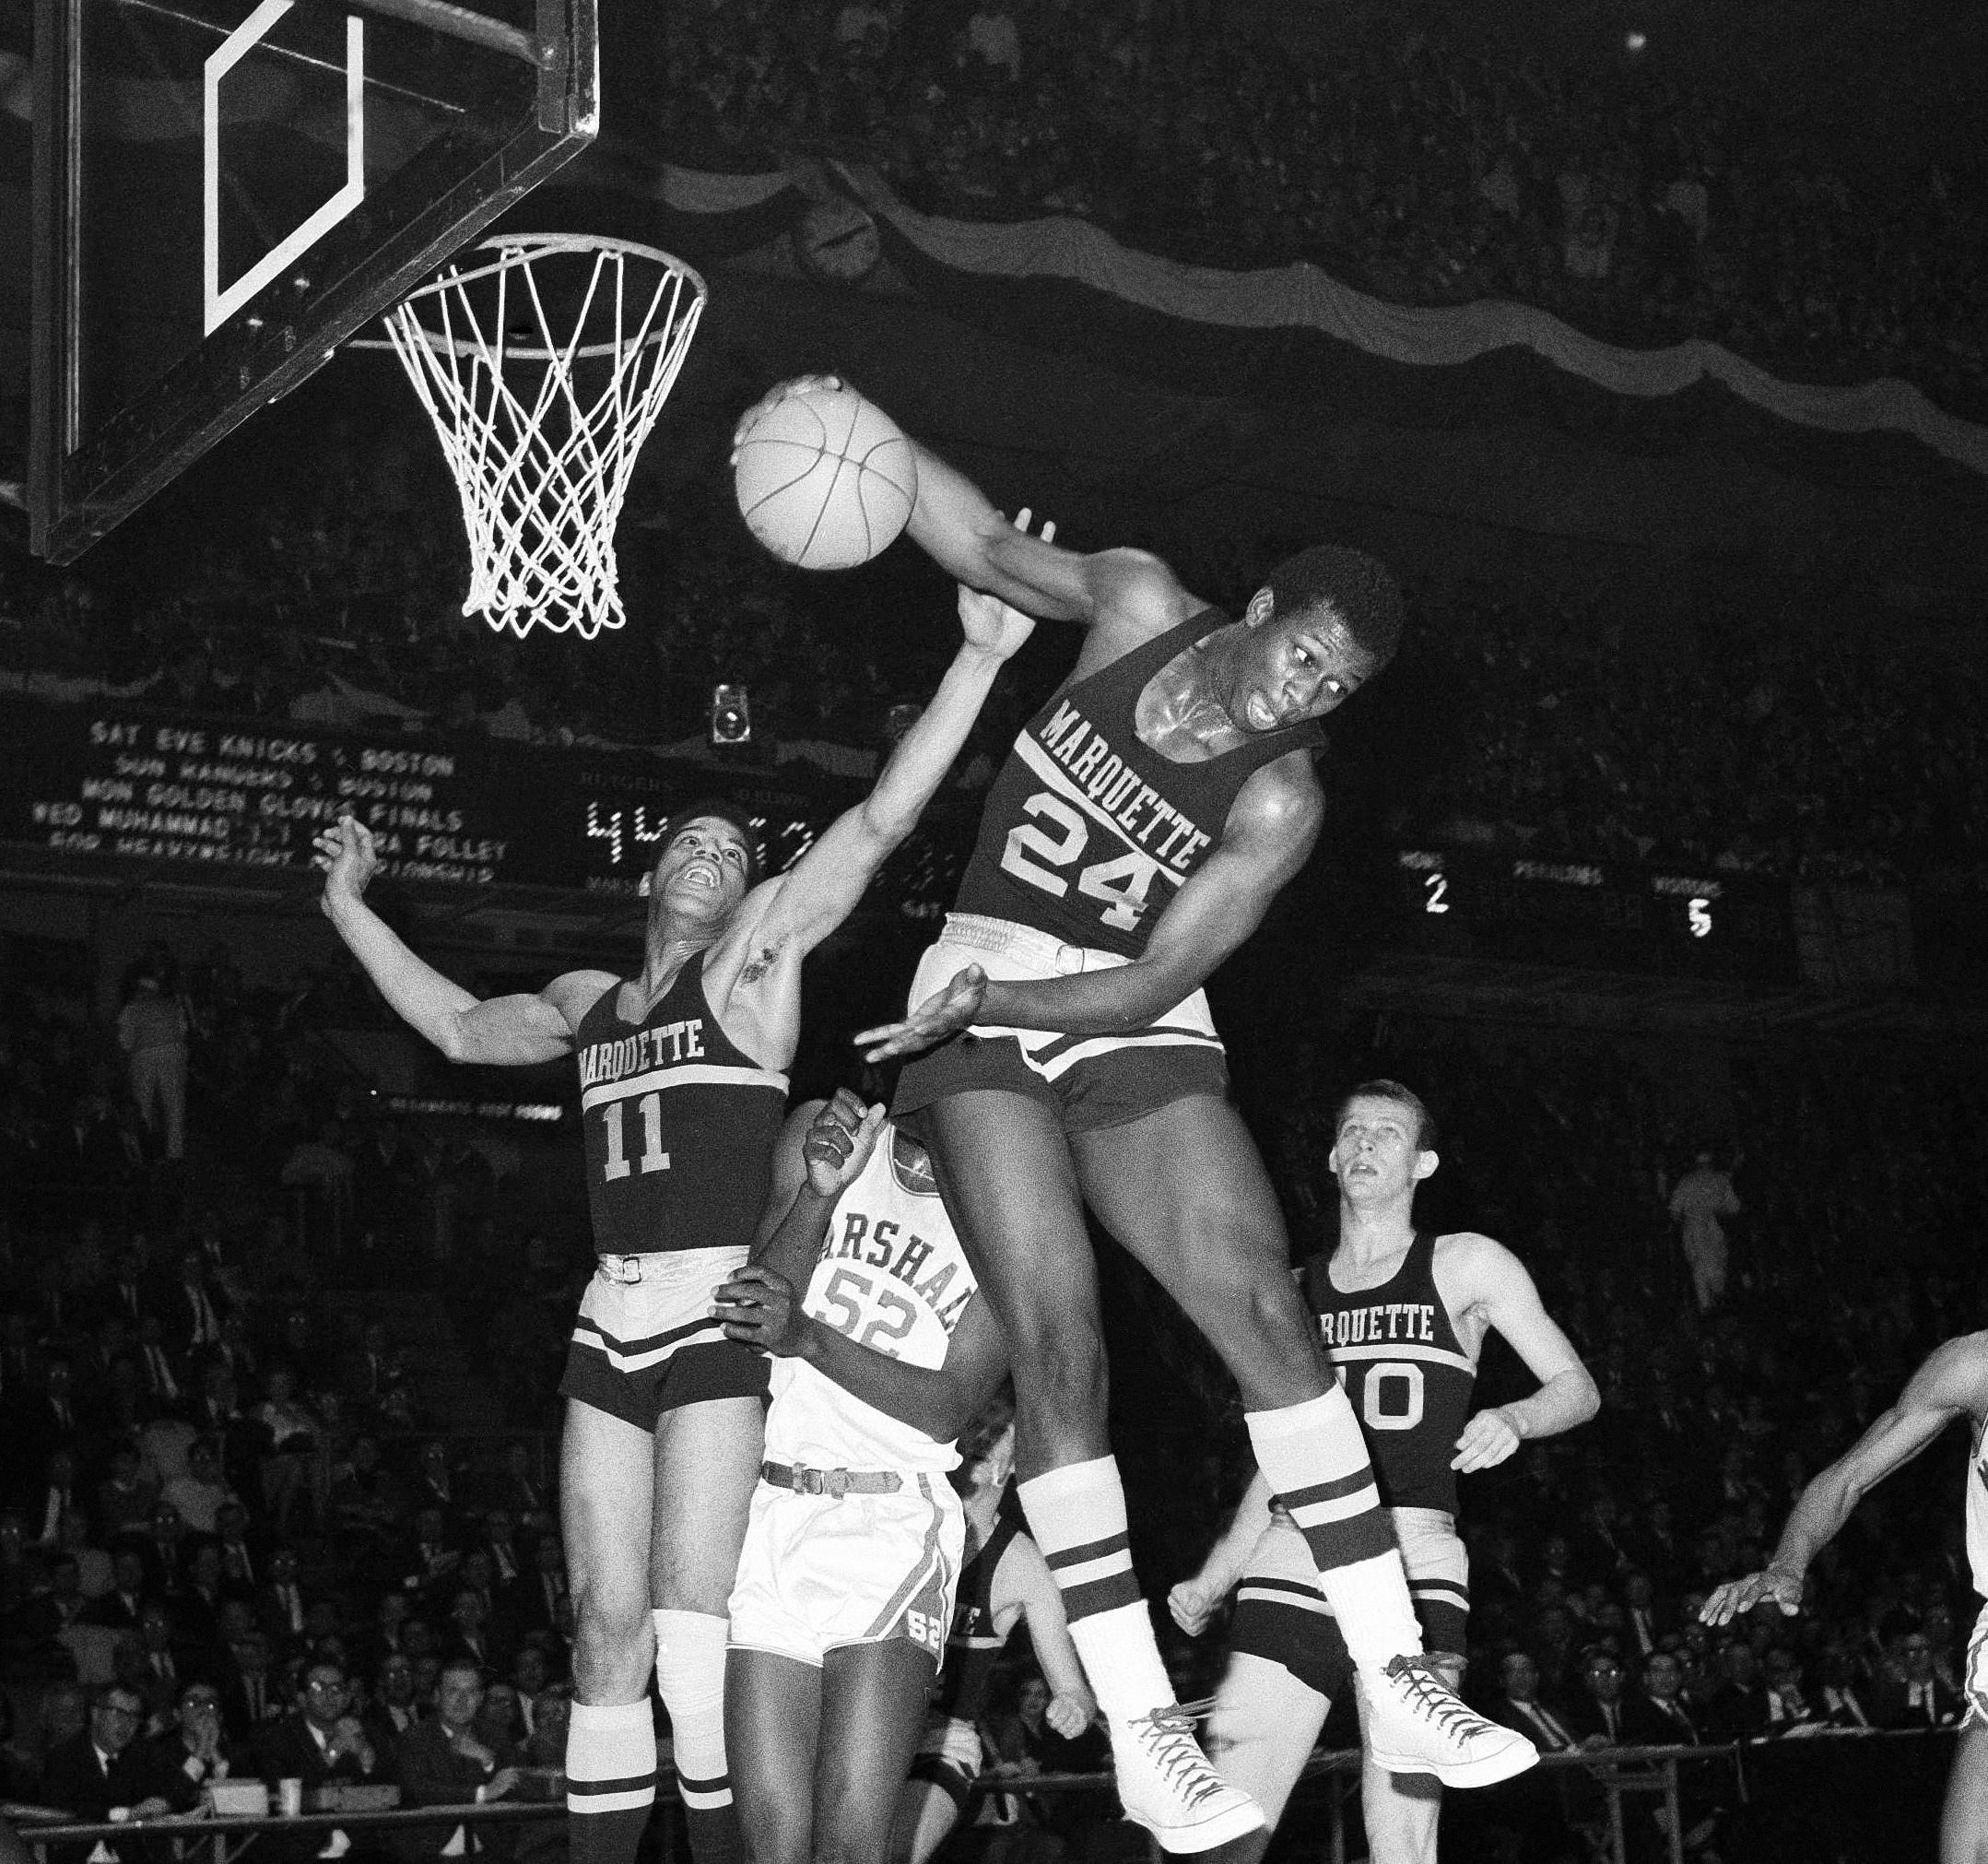 Former Marquette basketball star George Thompson dies at 74